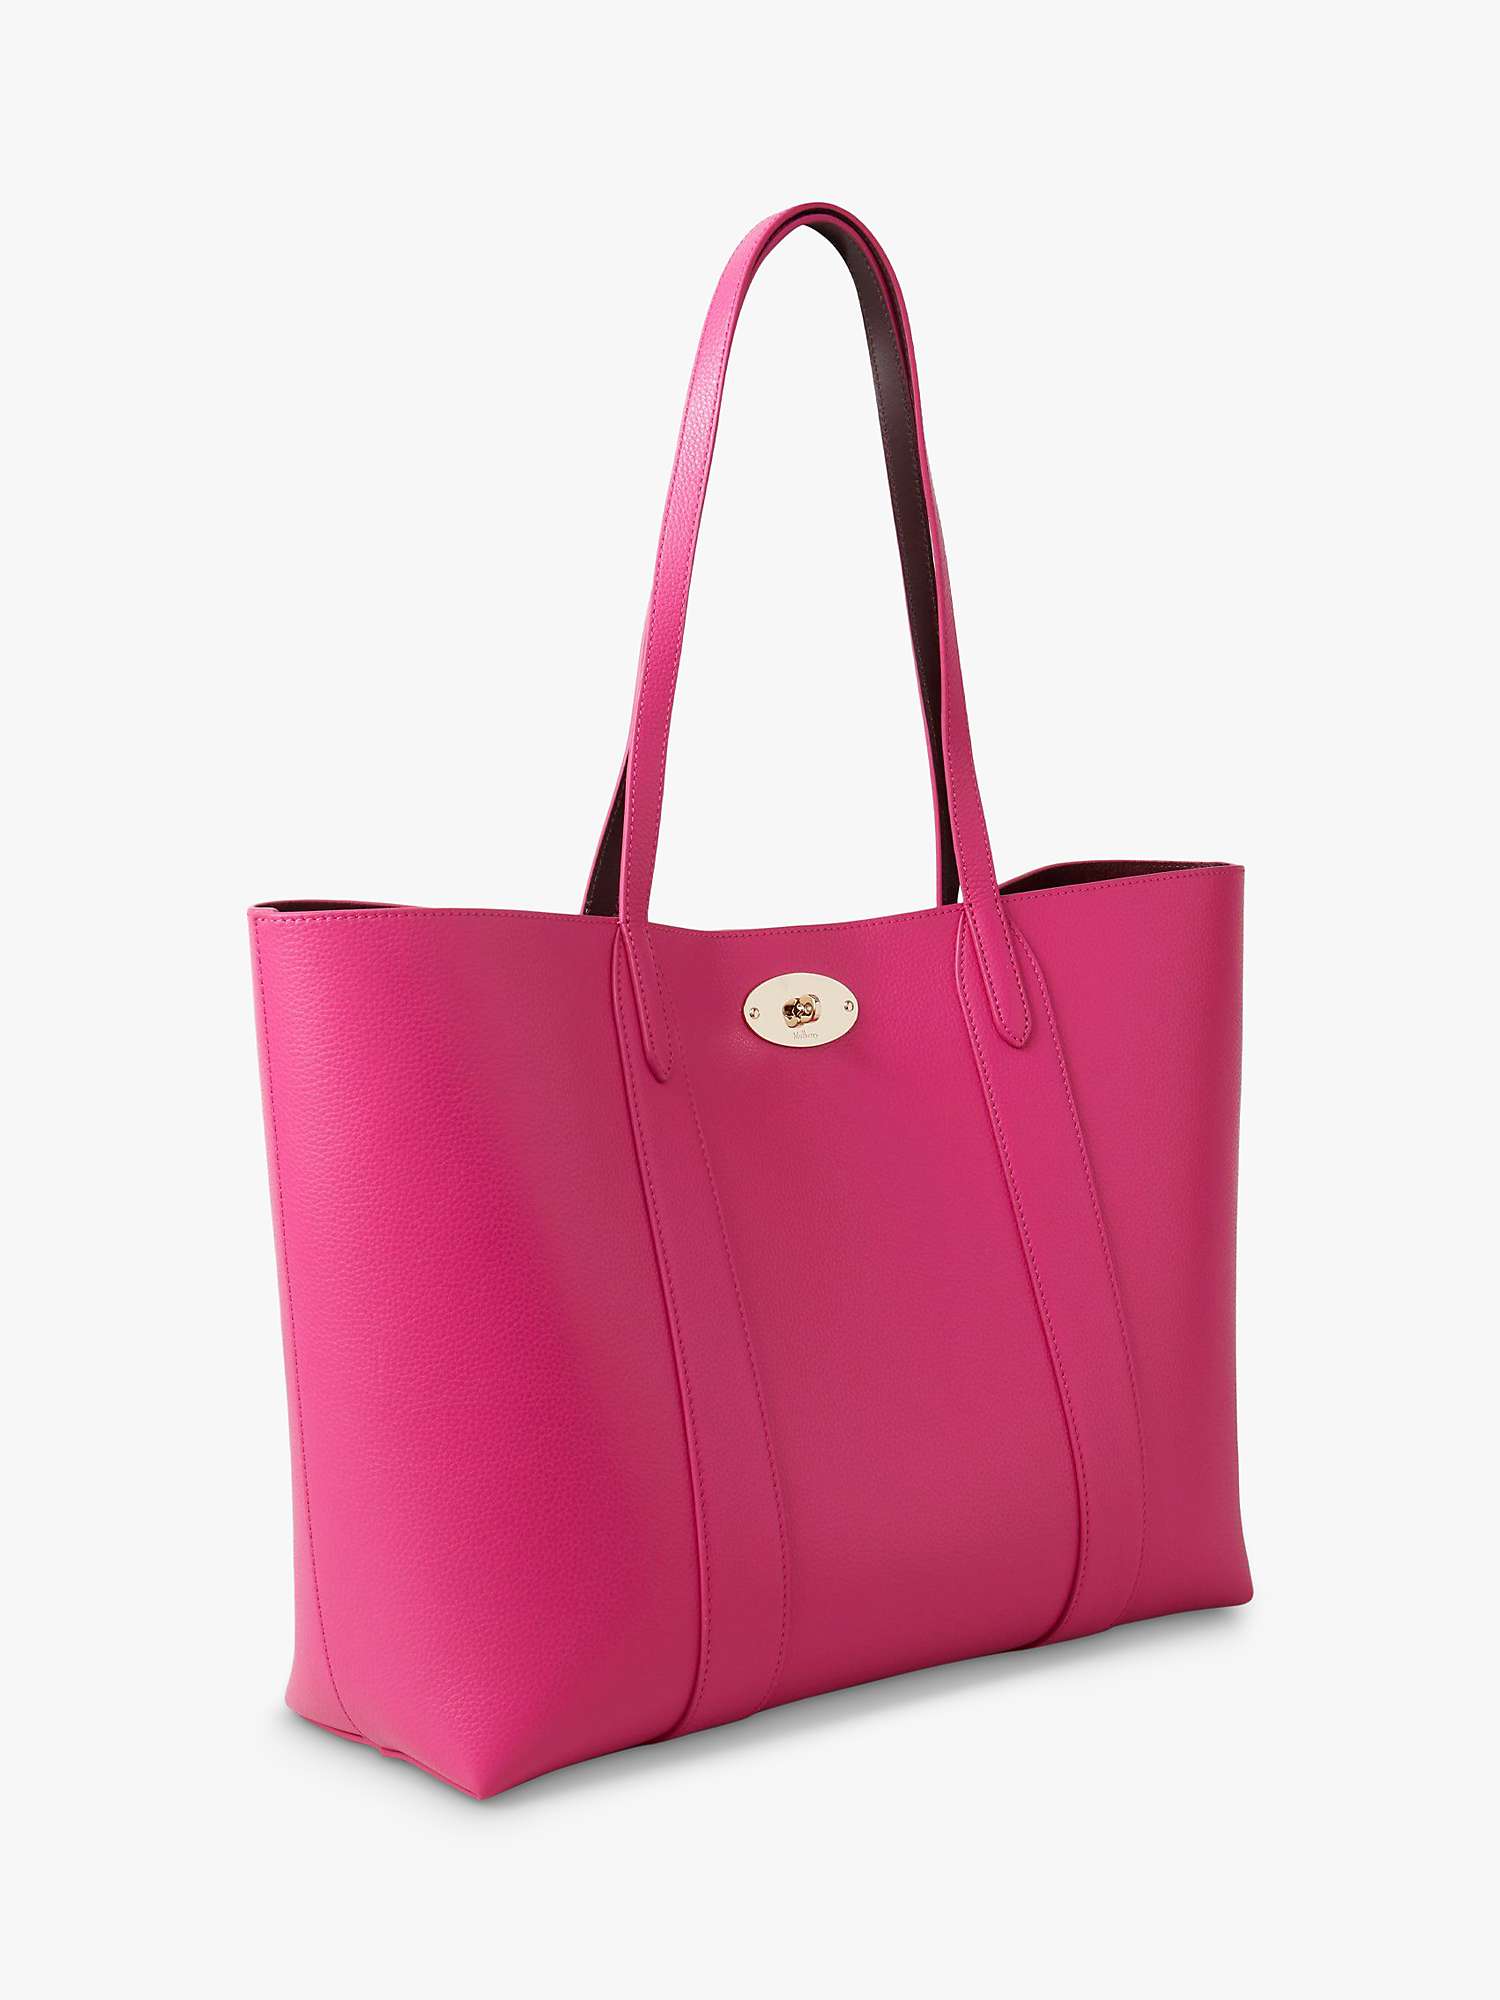 Mulberry Bayswater Small Classic Grain Leather Tote Bag, Mulberry